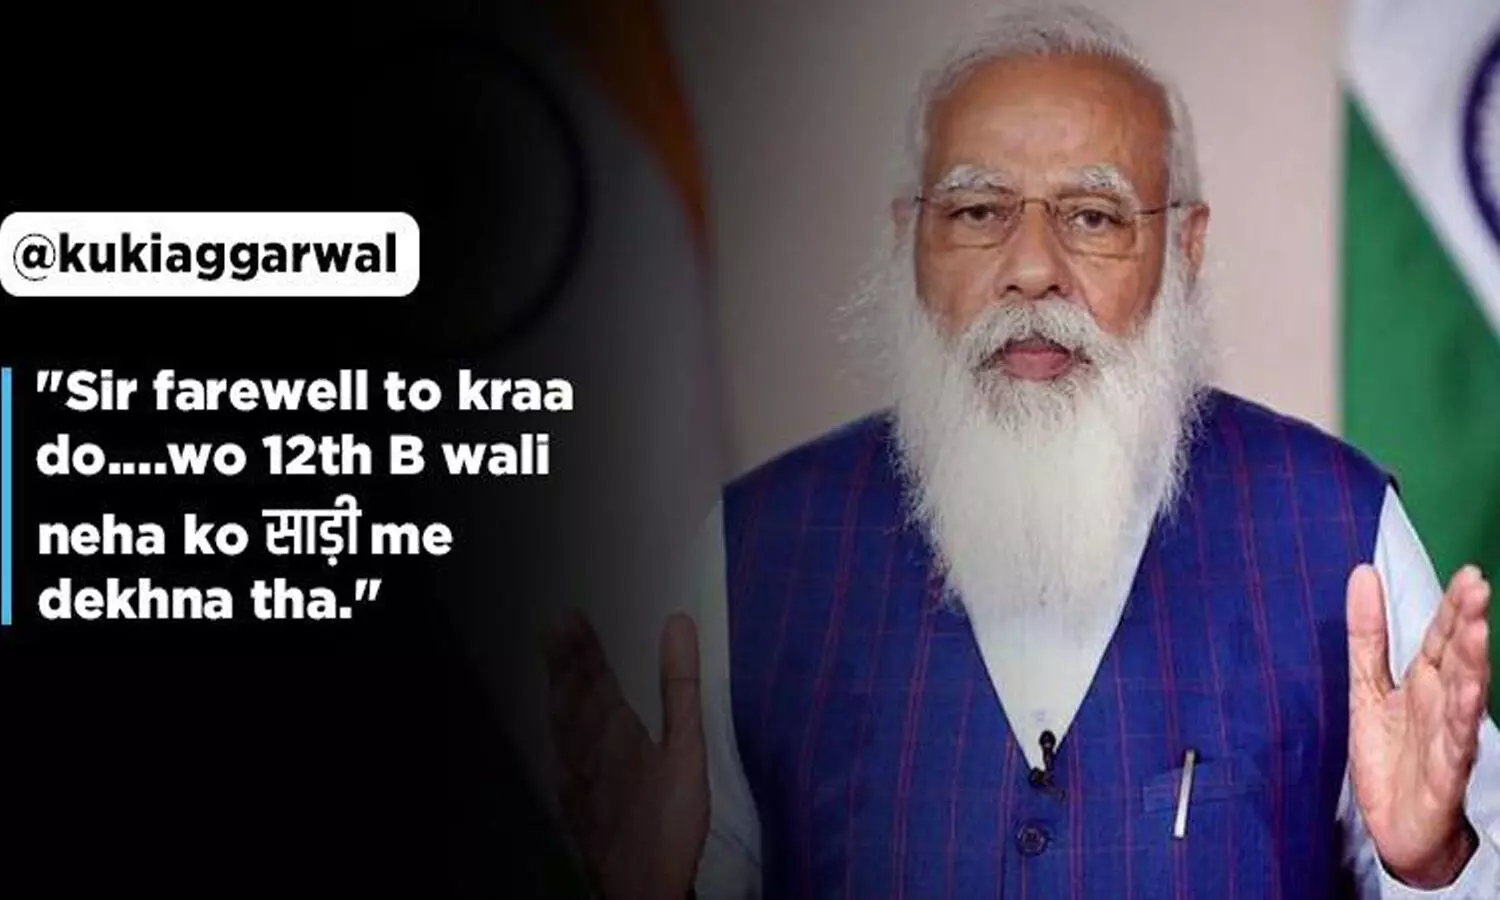 Sir, Farewell to kara do...: Students hilarious request to PM Modi goes viral